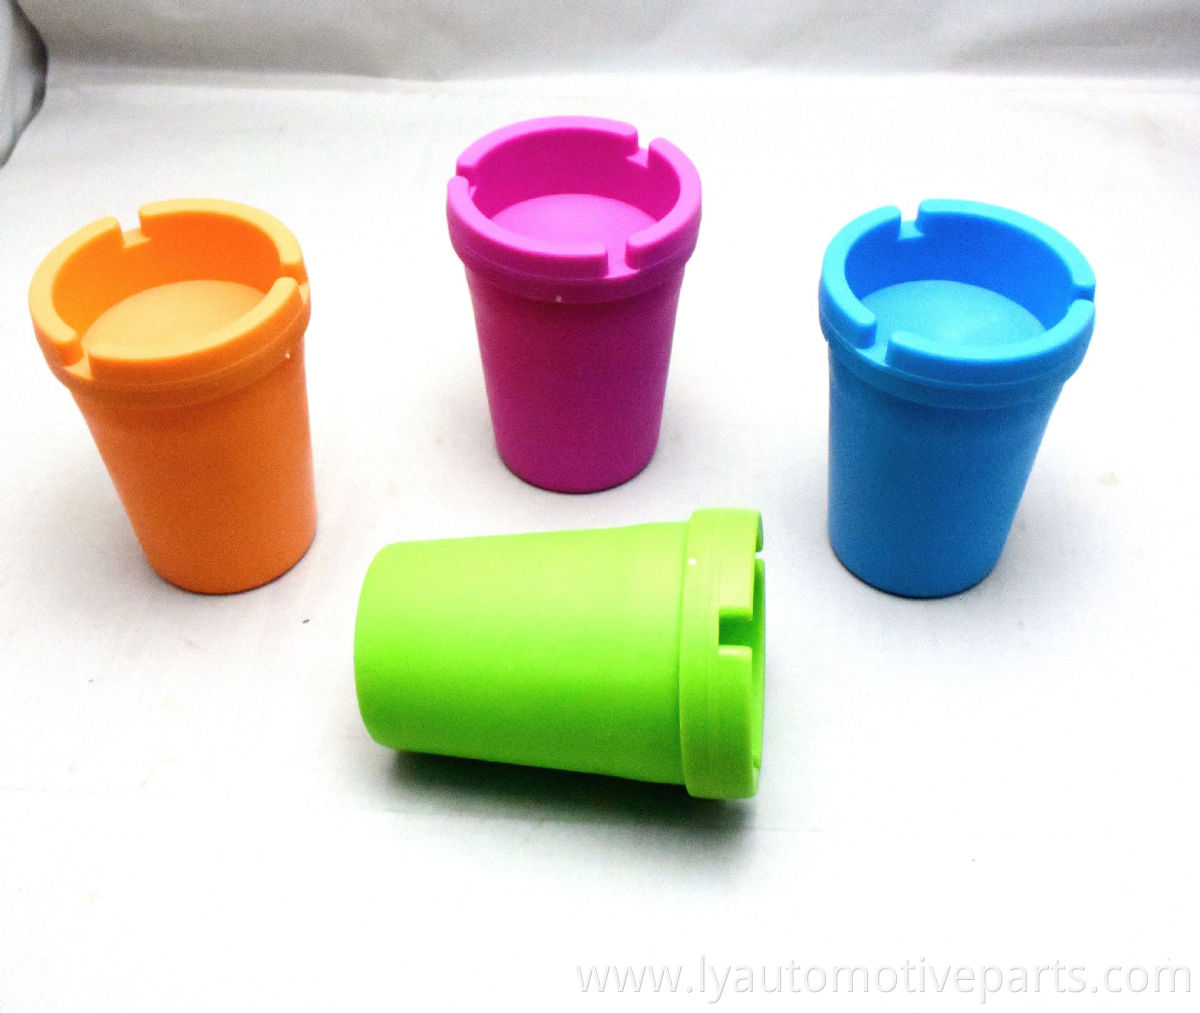 Car Products Ashtray STUB Out Glow in The Dark Cup SELF EXTINGUISHING Cigarette Ashtray Butt Bucket Portable Ashtray